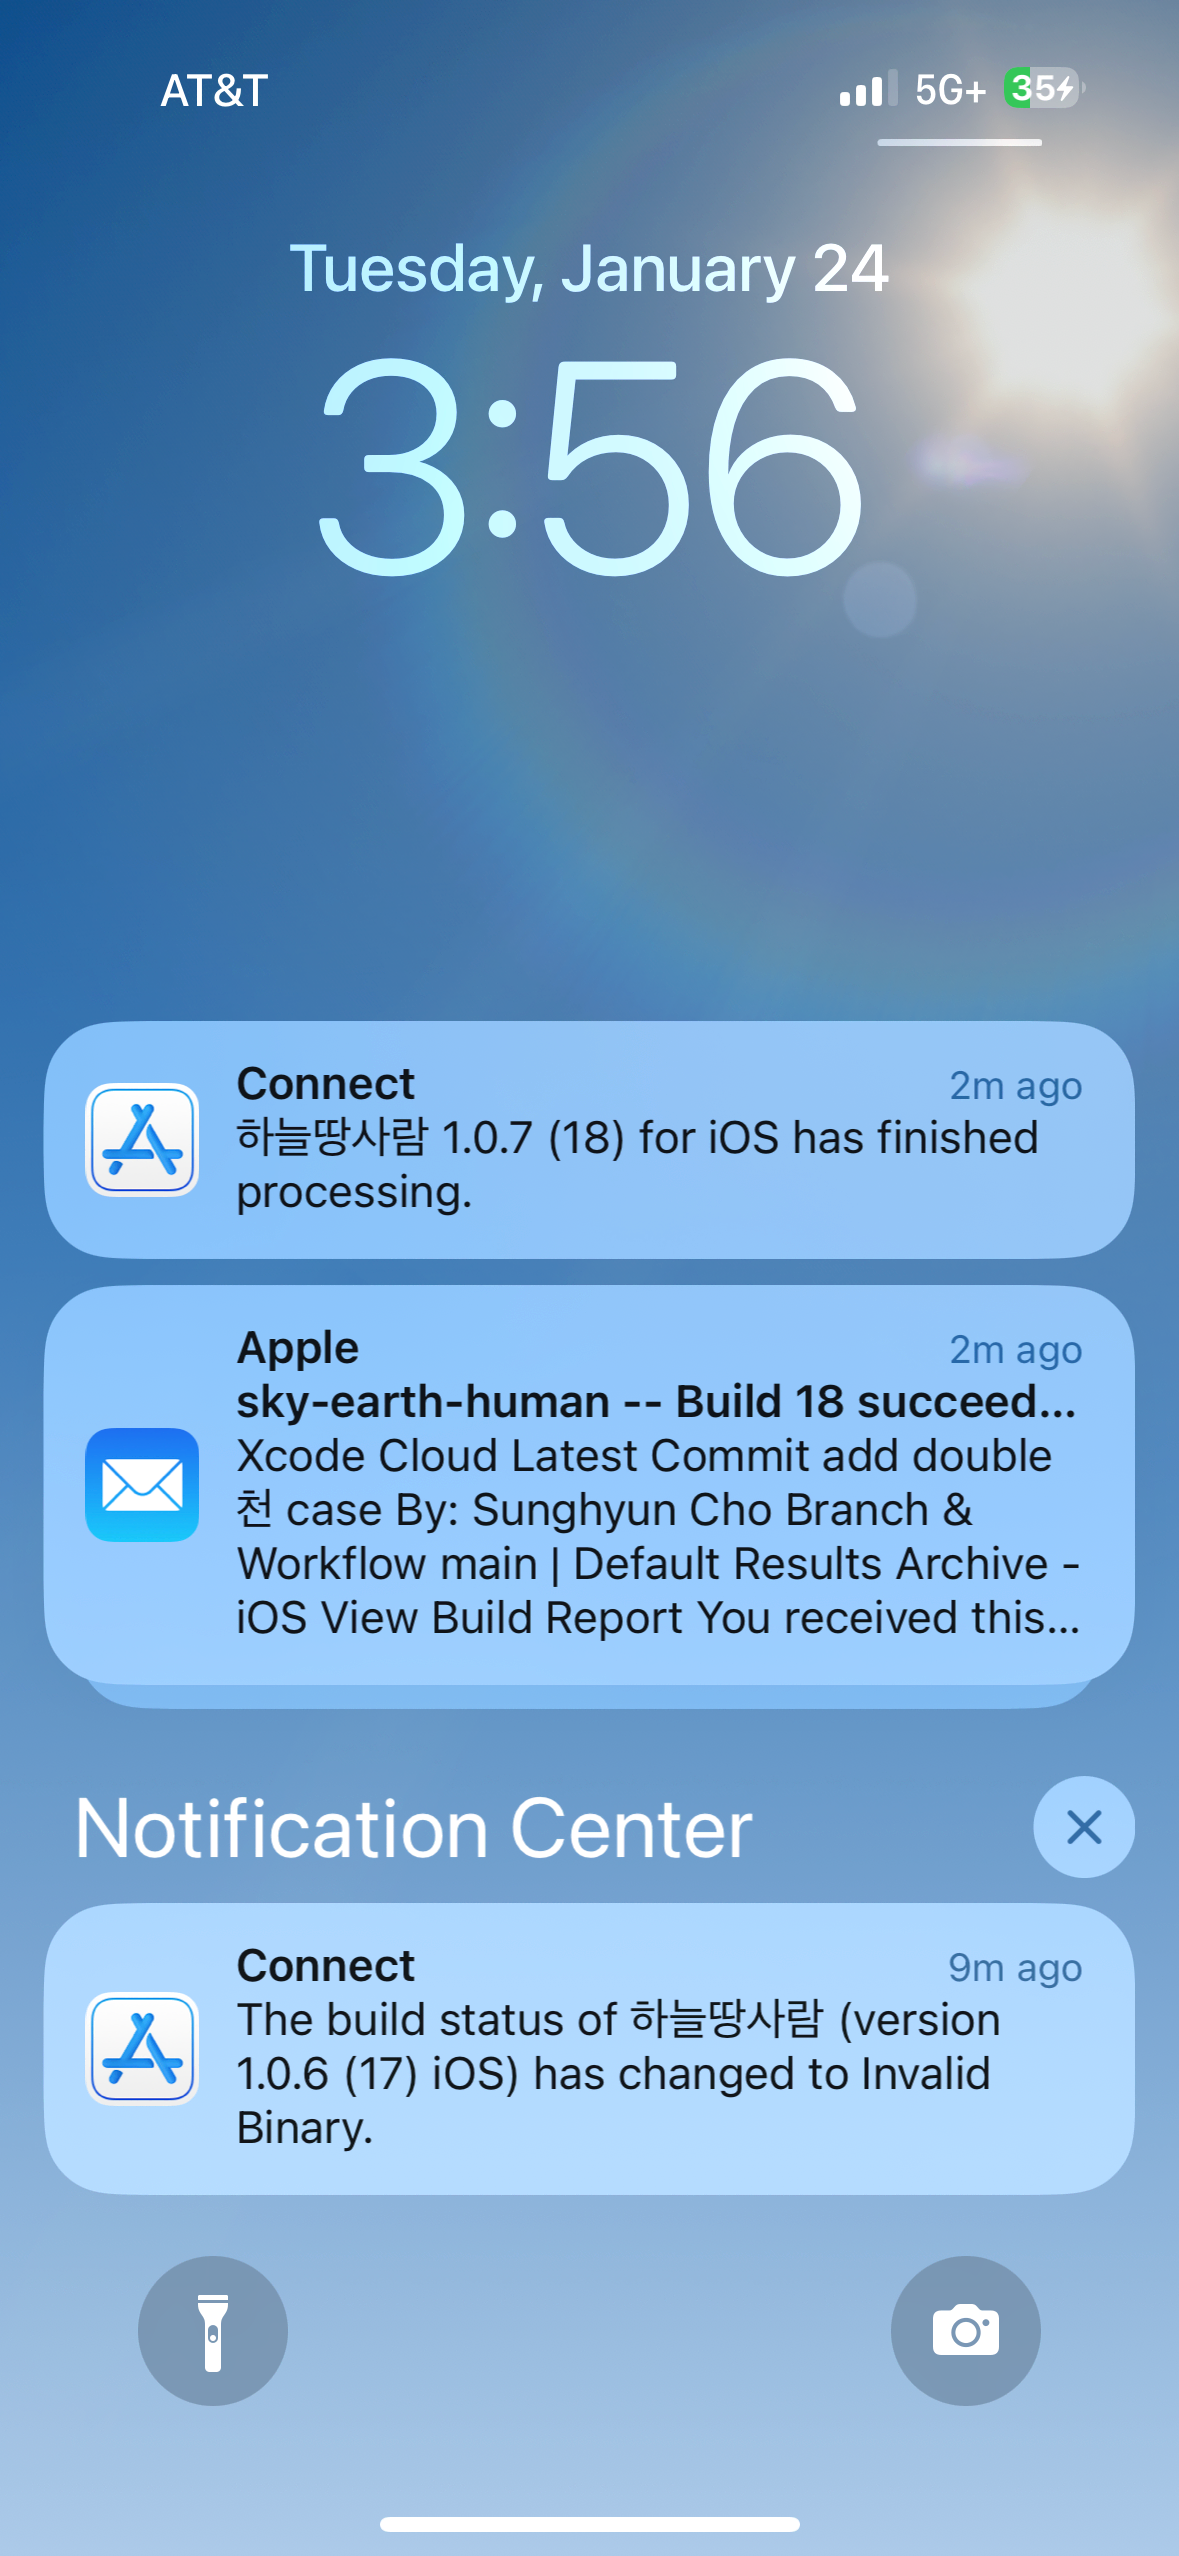 Push notifications are supported.